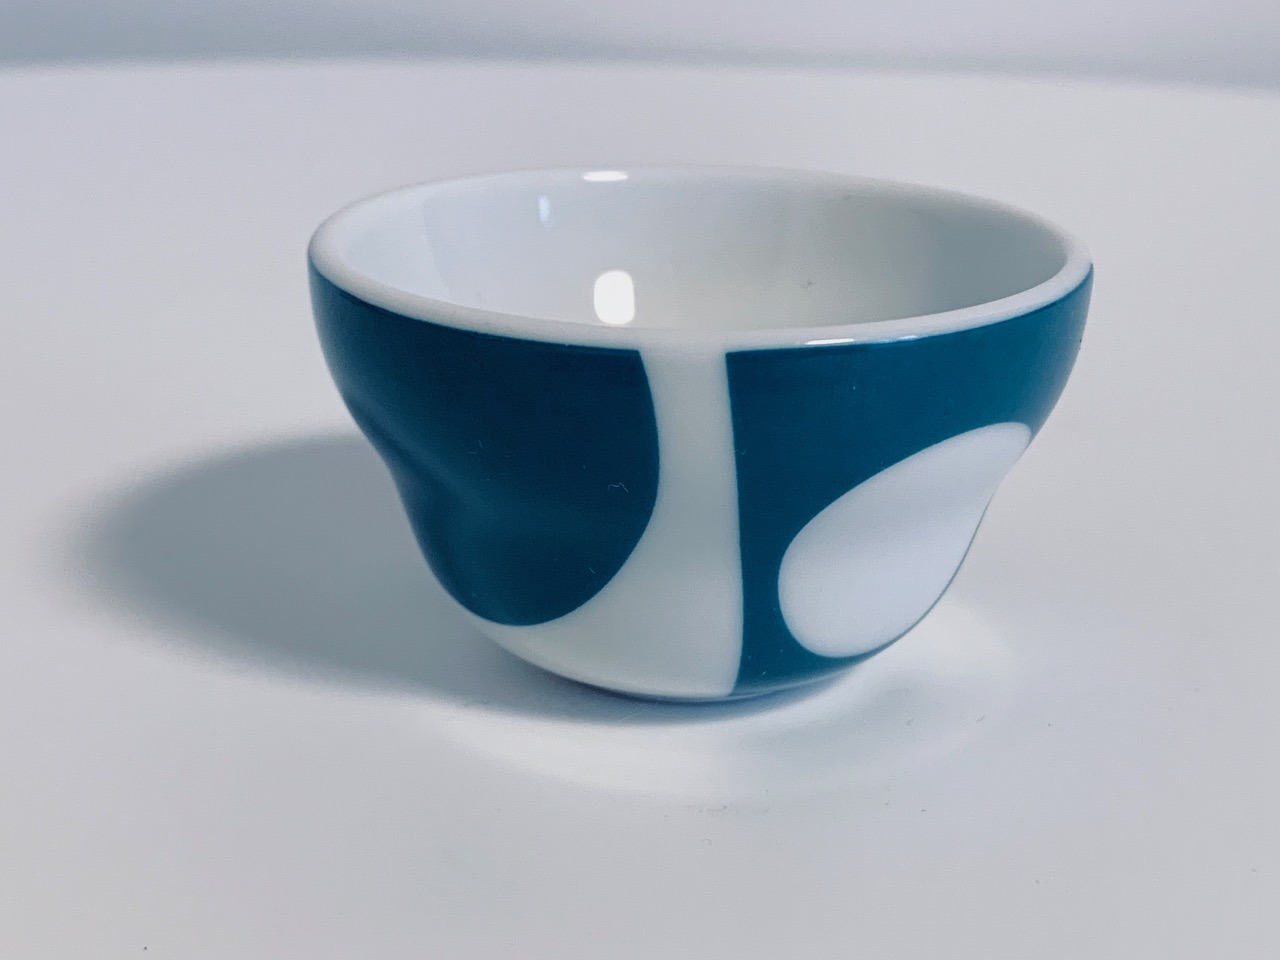 Image of the Verner Panton Menu egg cup blue green offered in this ad.